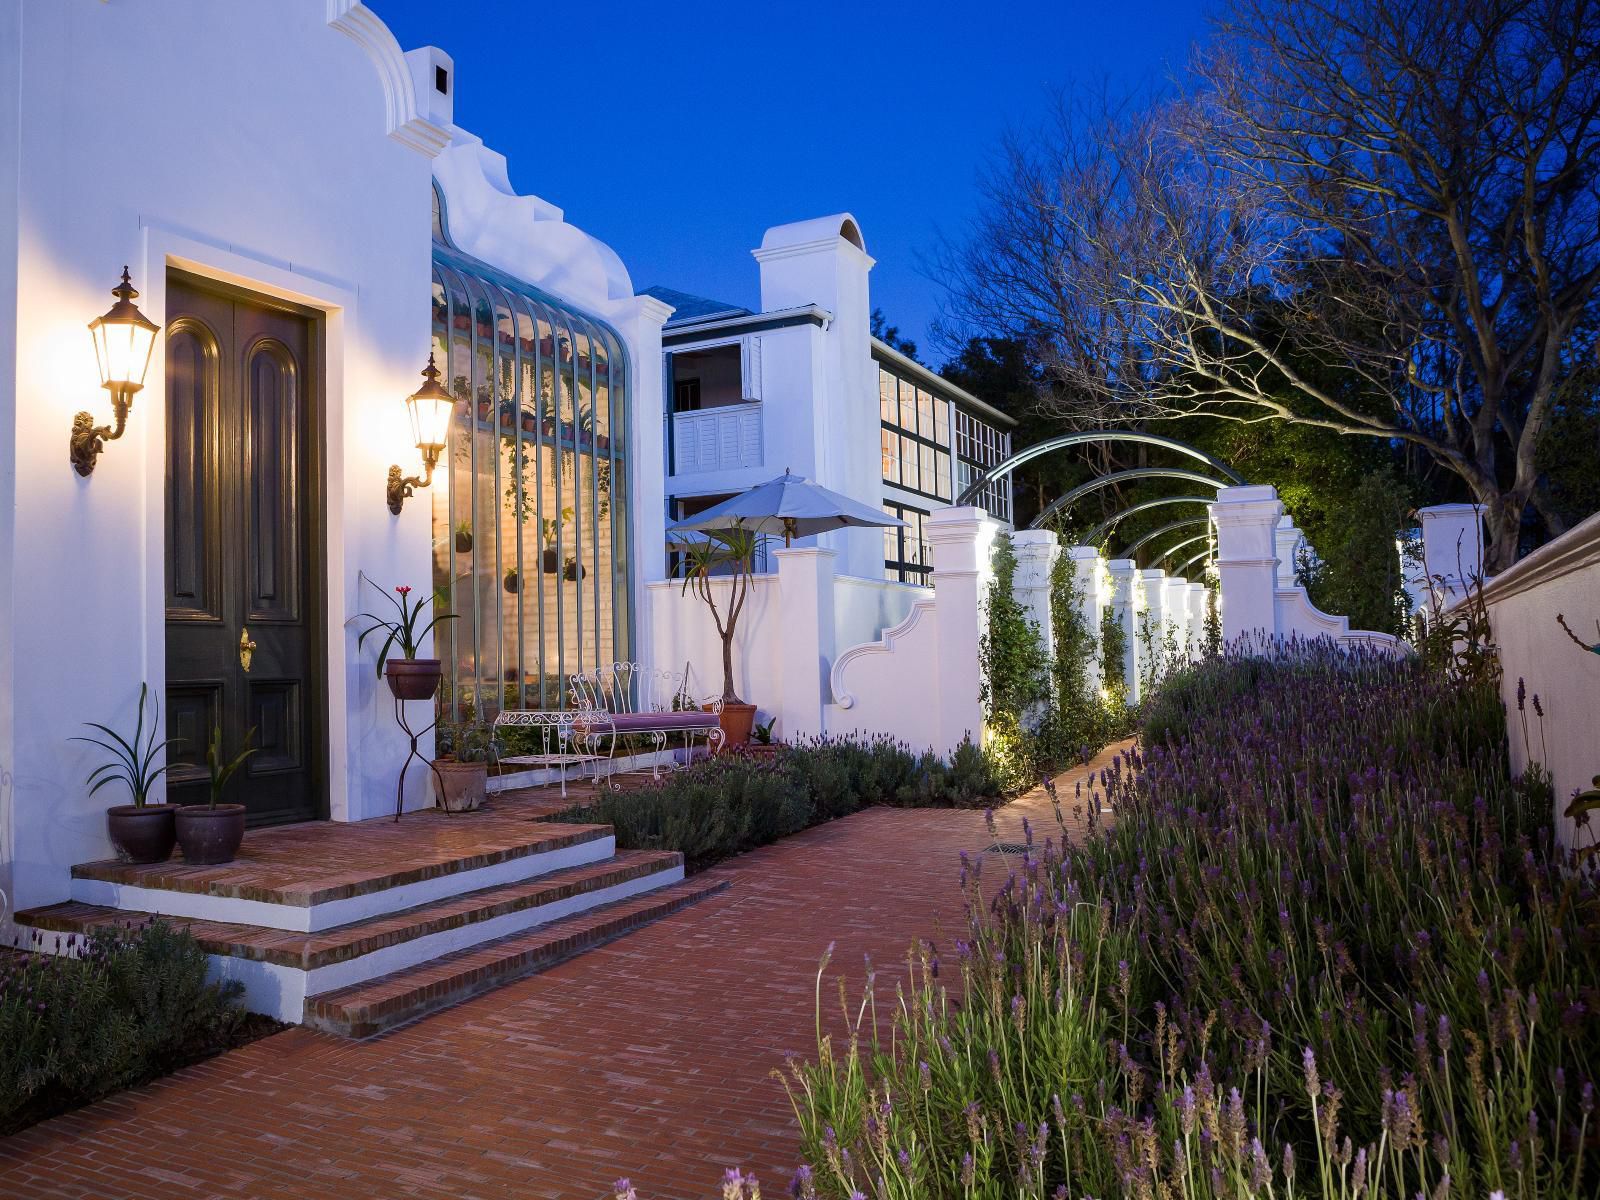 Akademie Street Boutique Hotel Franschhoek Western Cape South Africa House, Building, Architecture, Garden, Nature, Plant